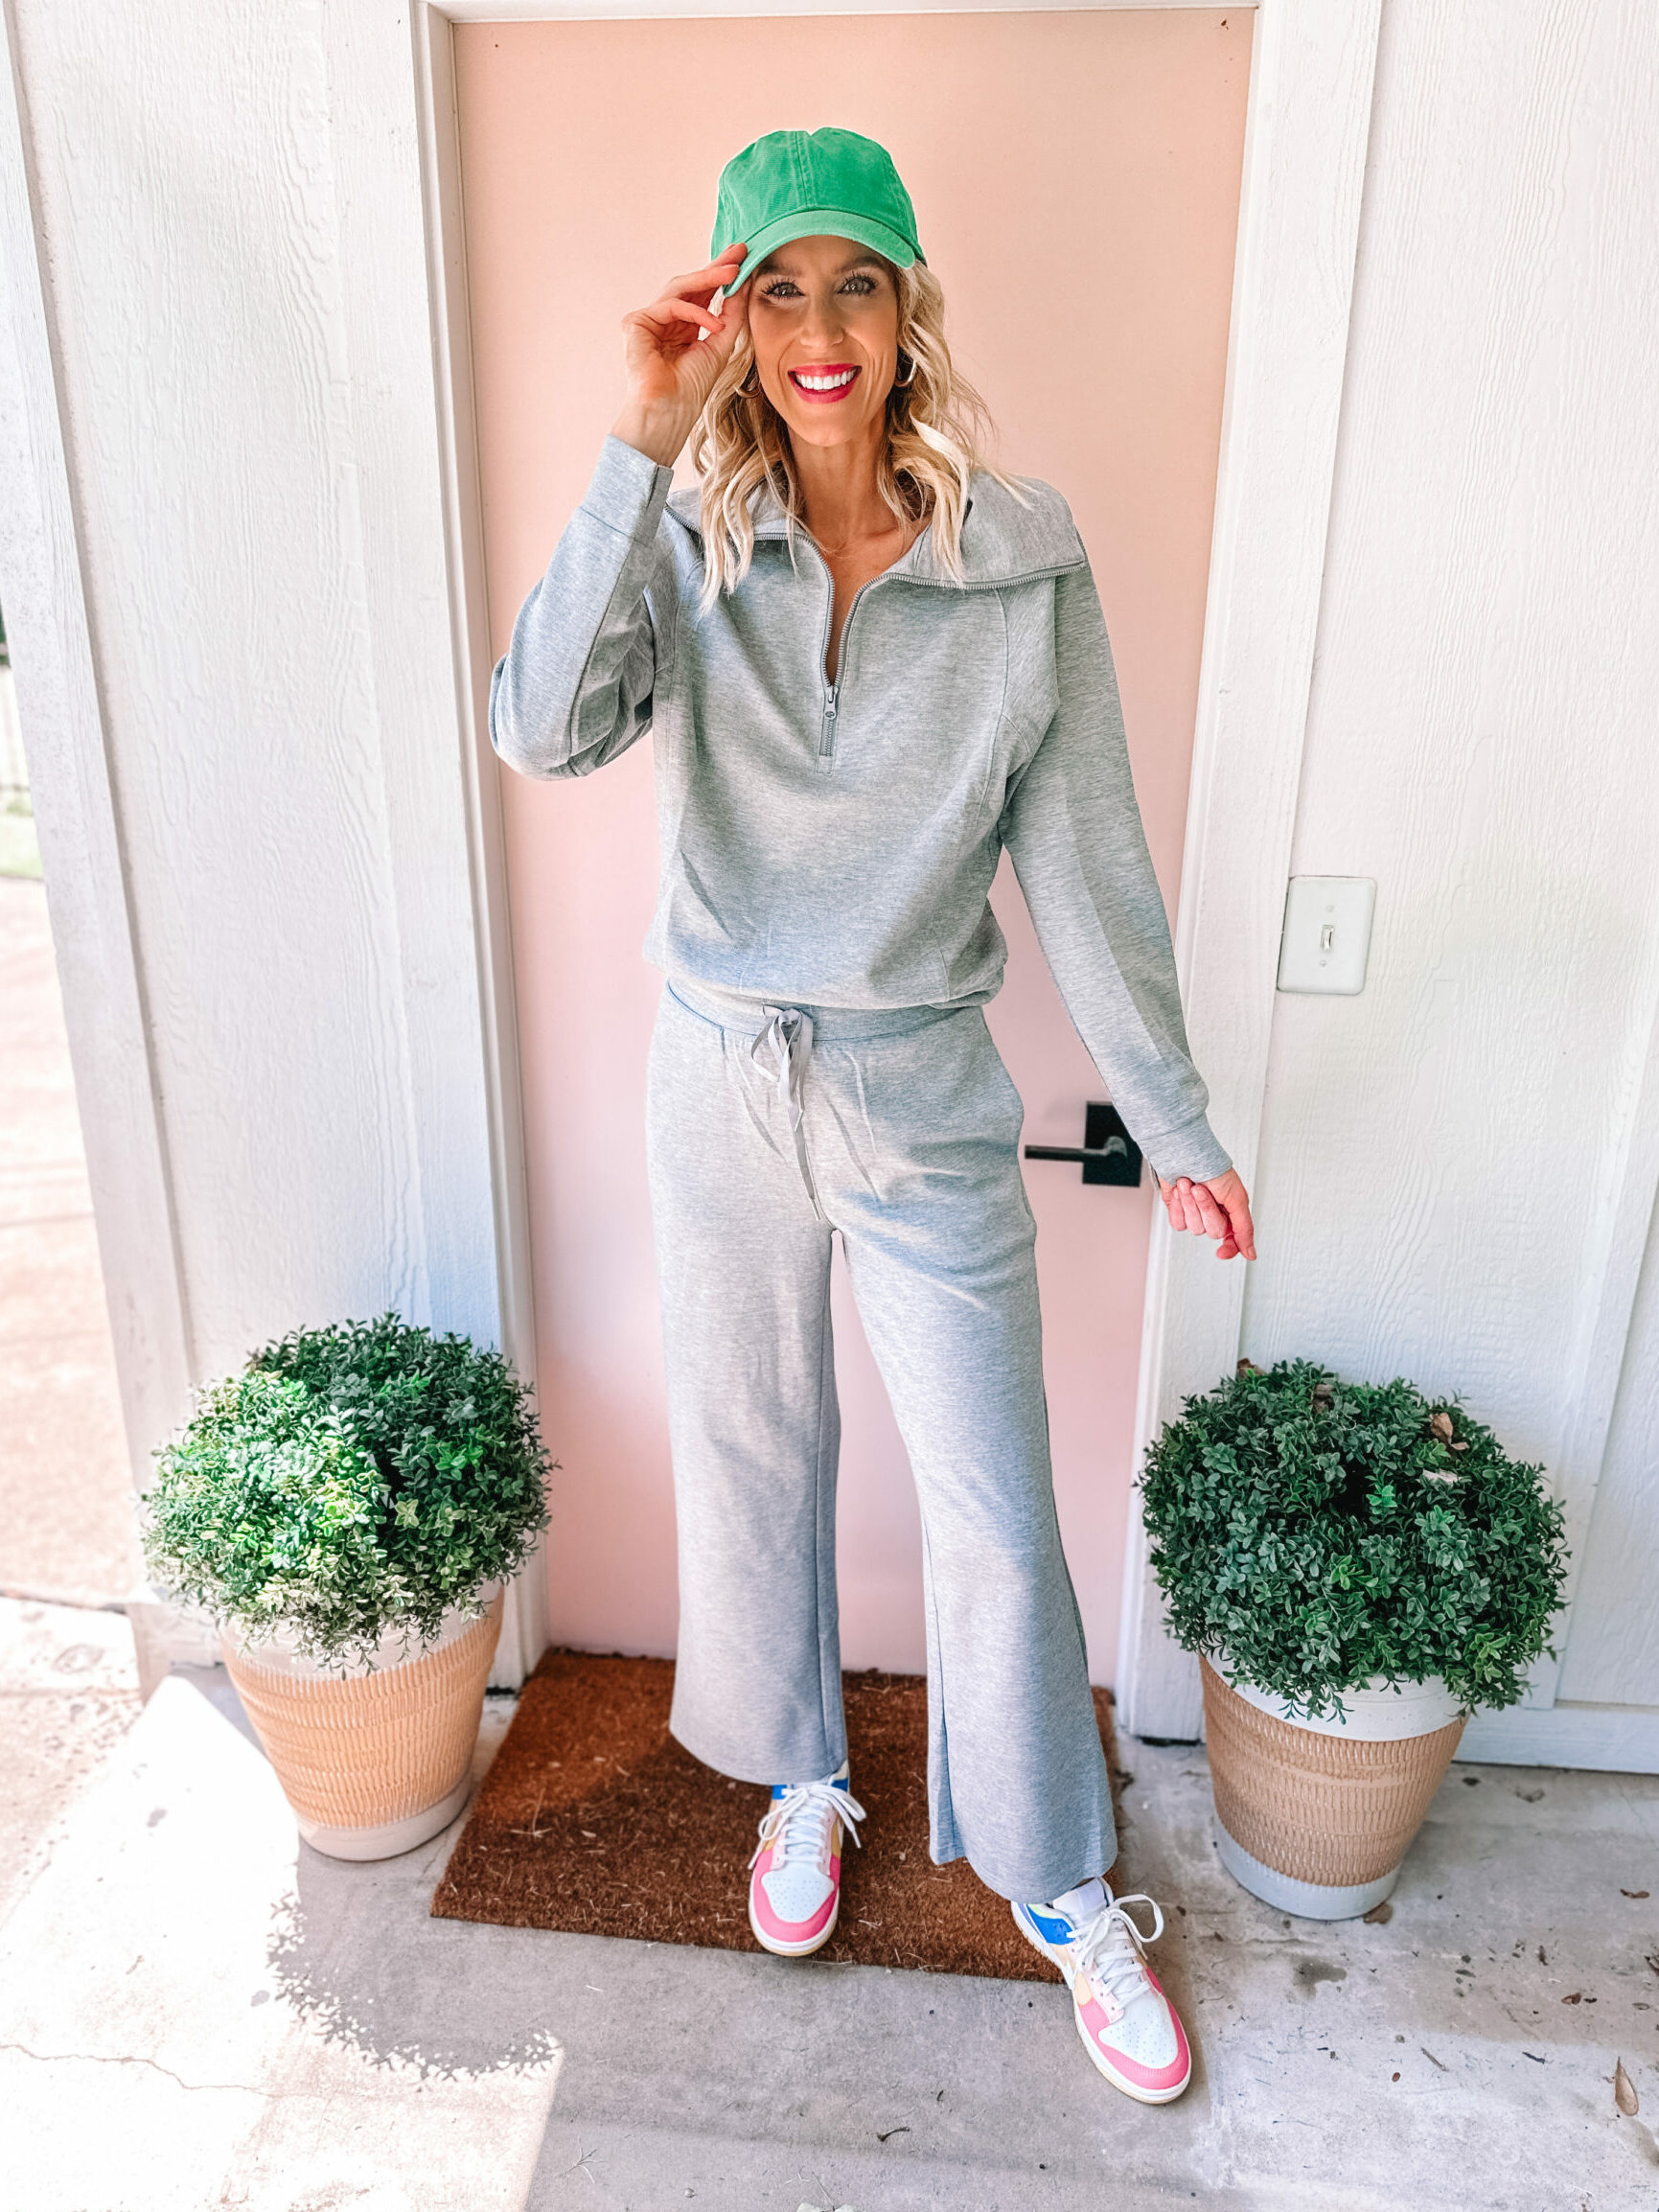 Spanx Air Essentials New Styles For Spring + Discount Code